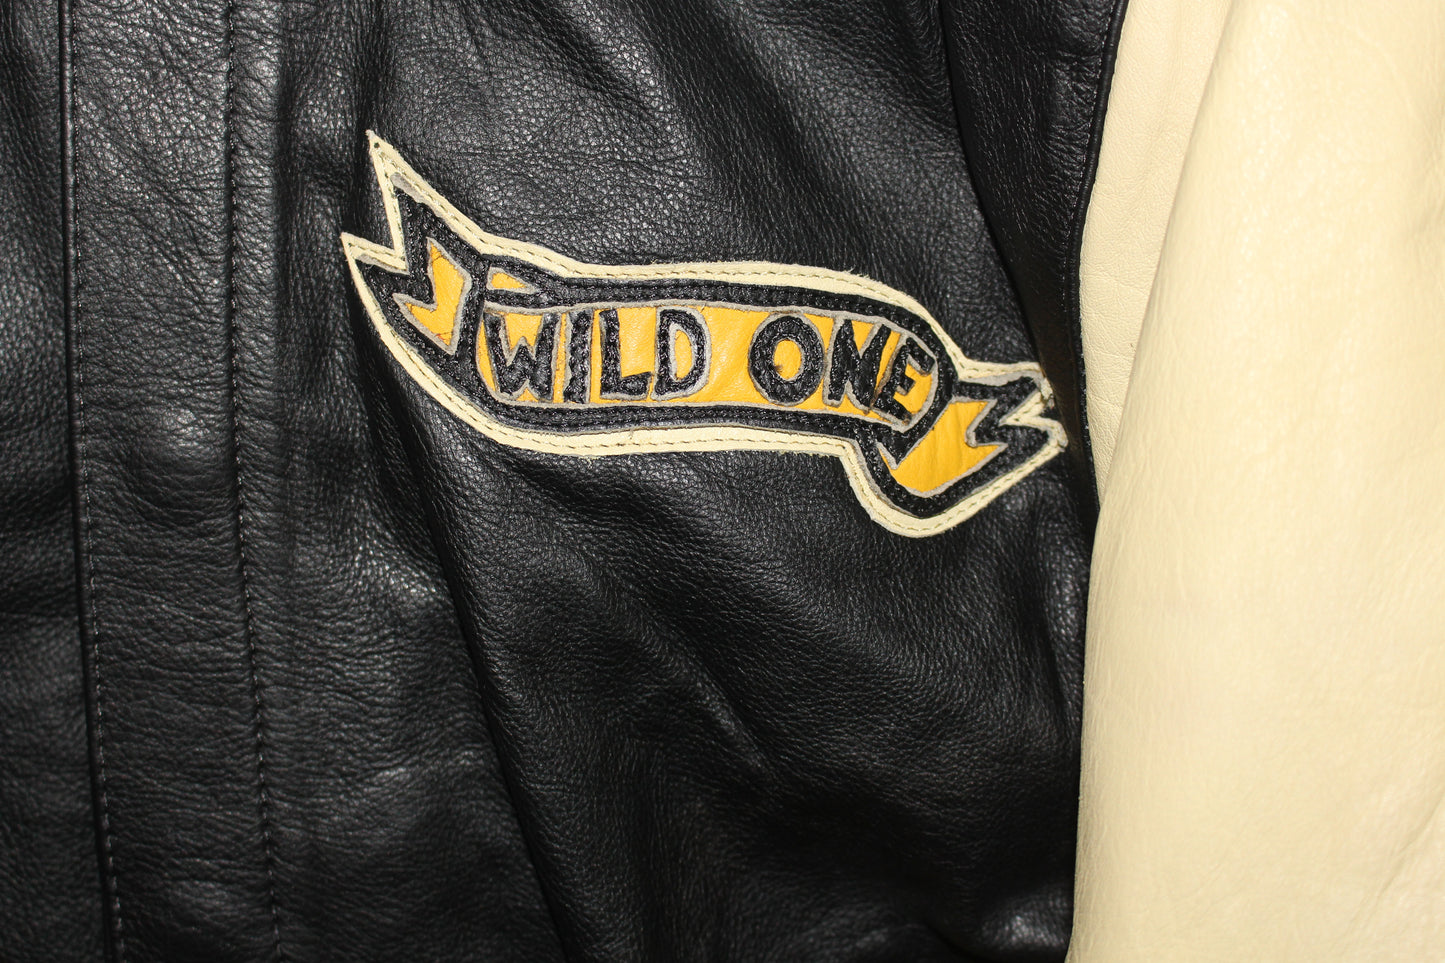 Mickey Mouse Wild One Disney Leather Jacket